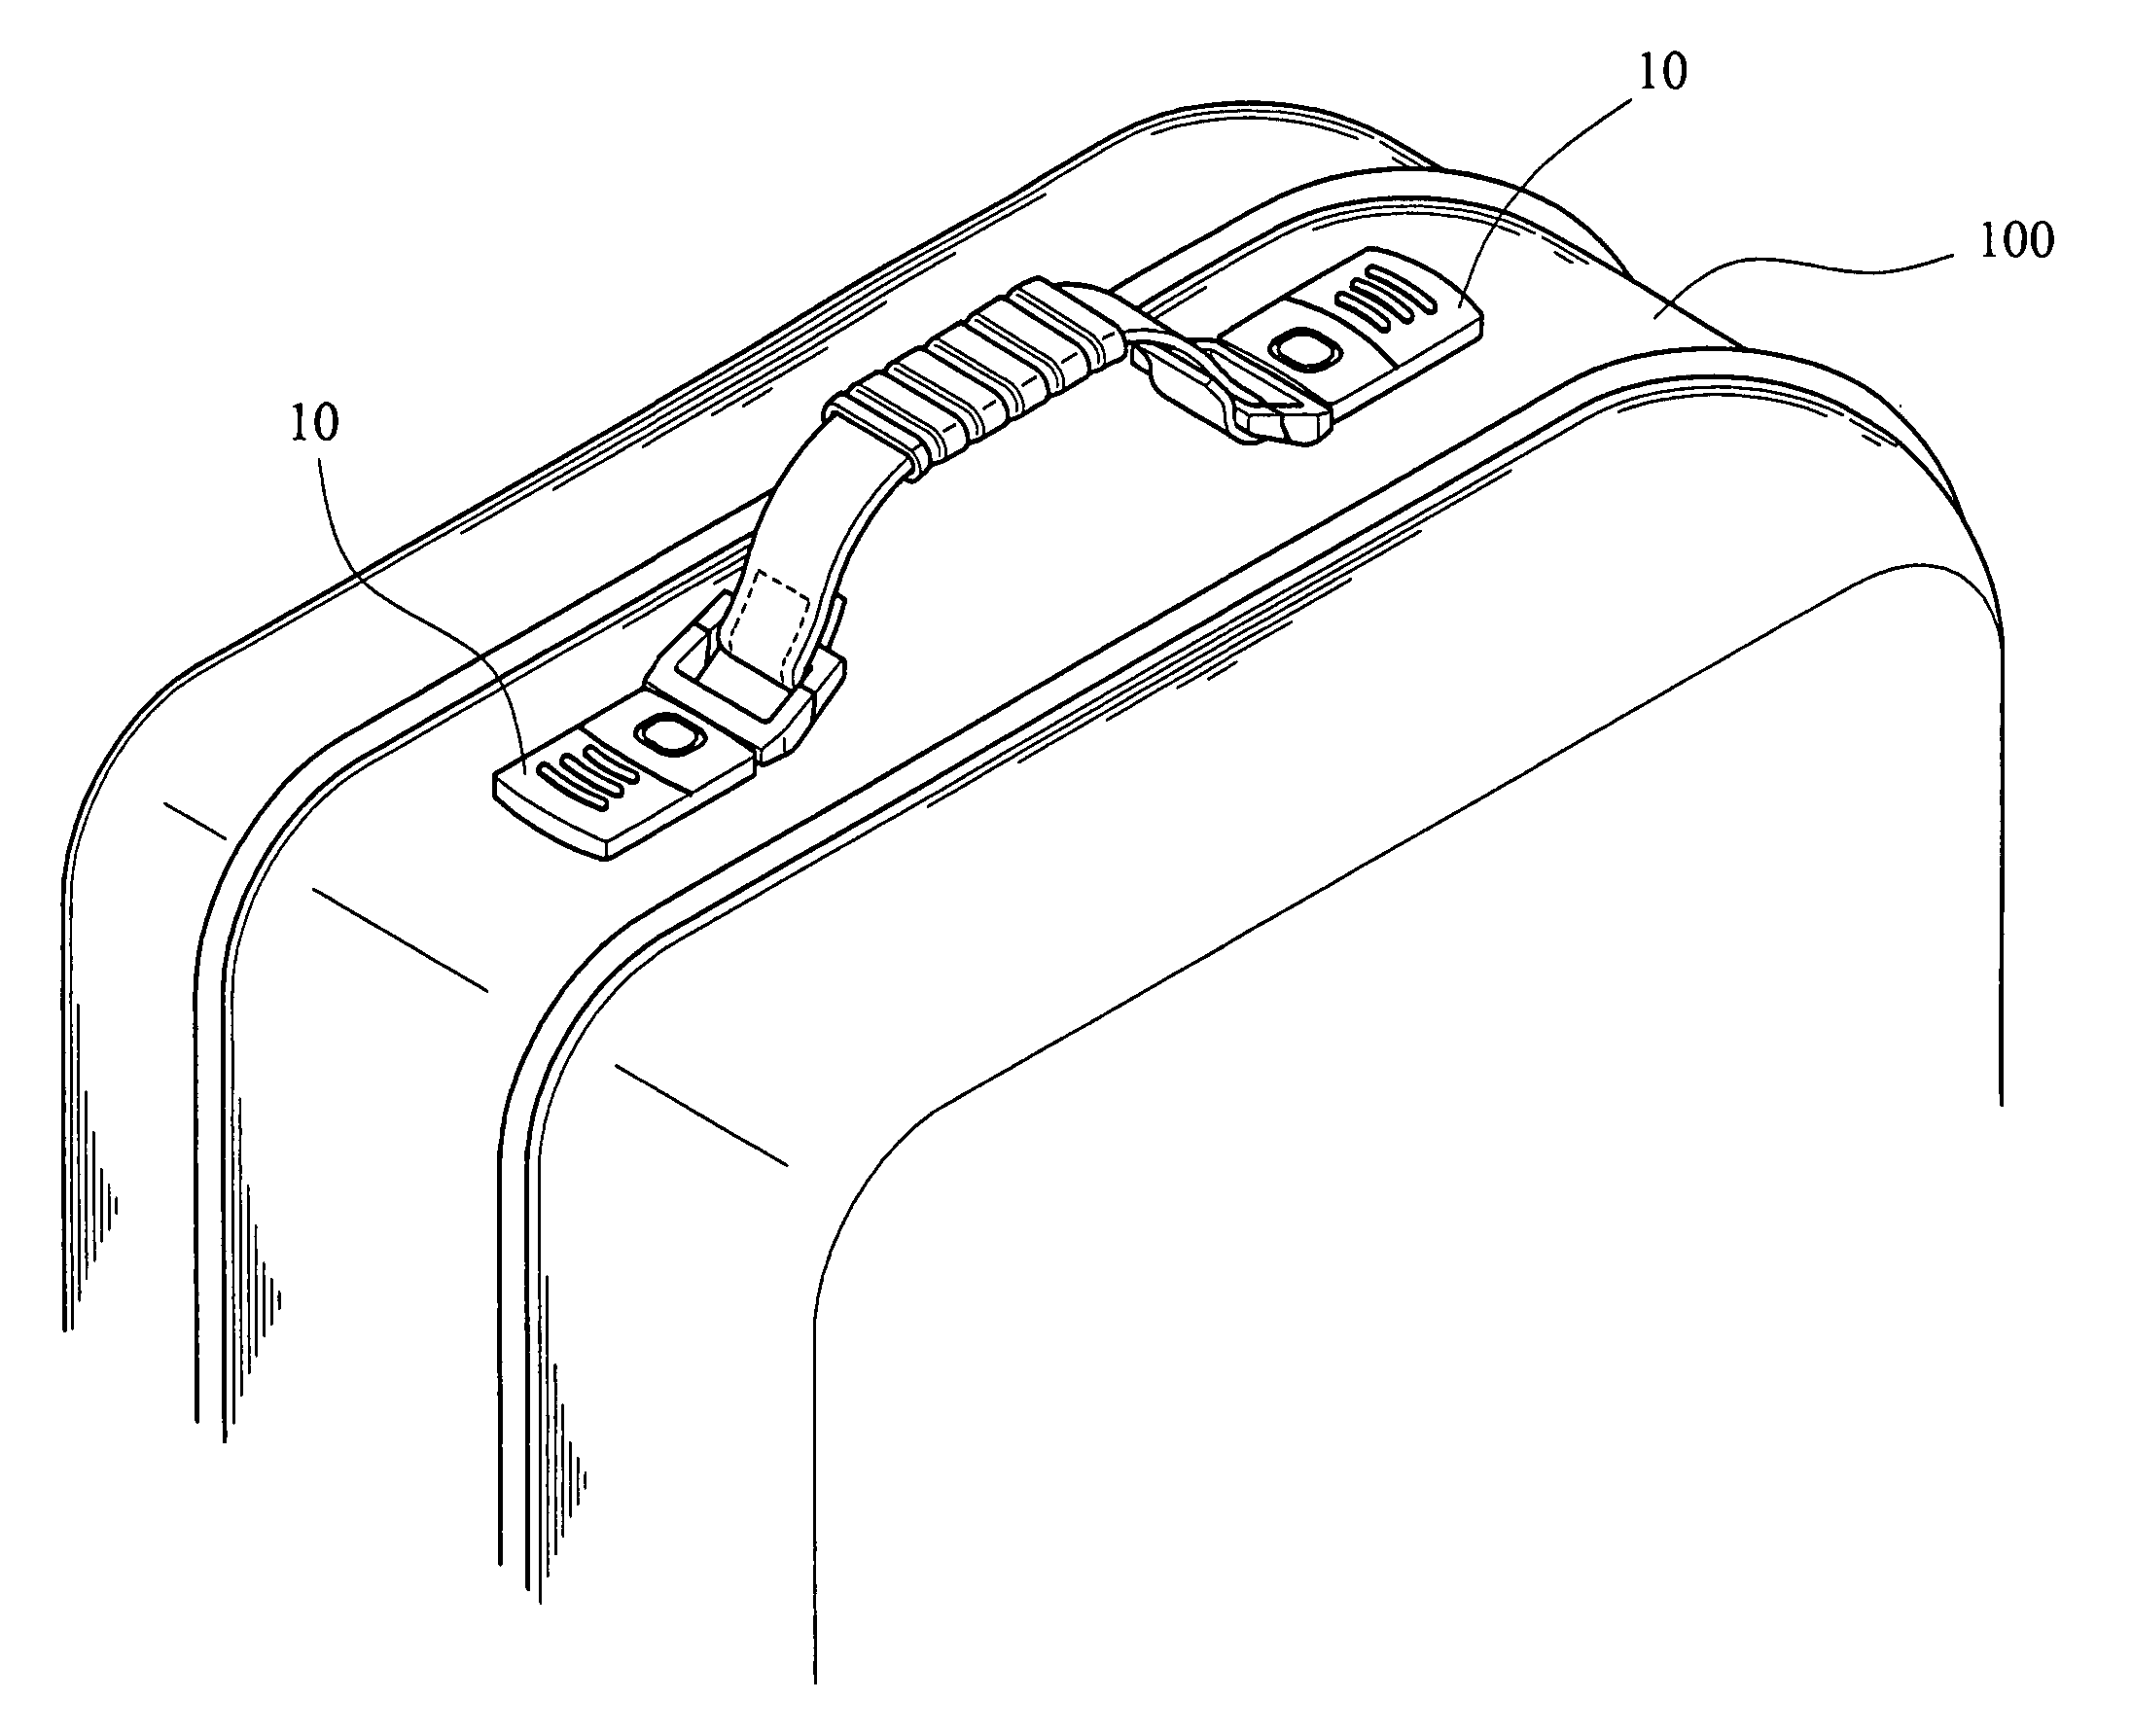 Carrying handle of luggage